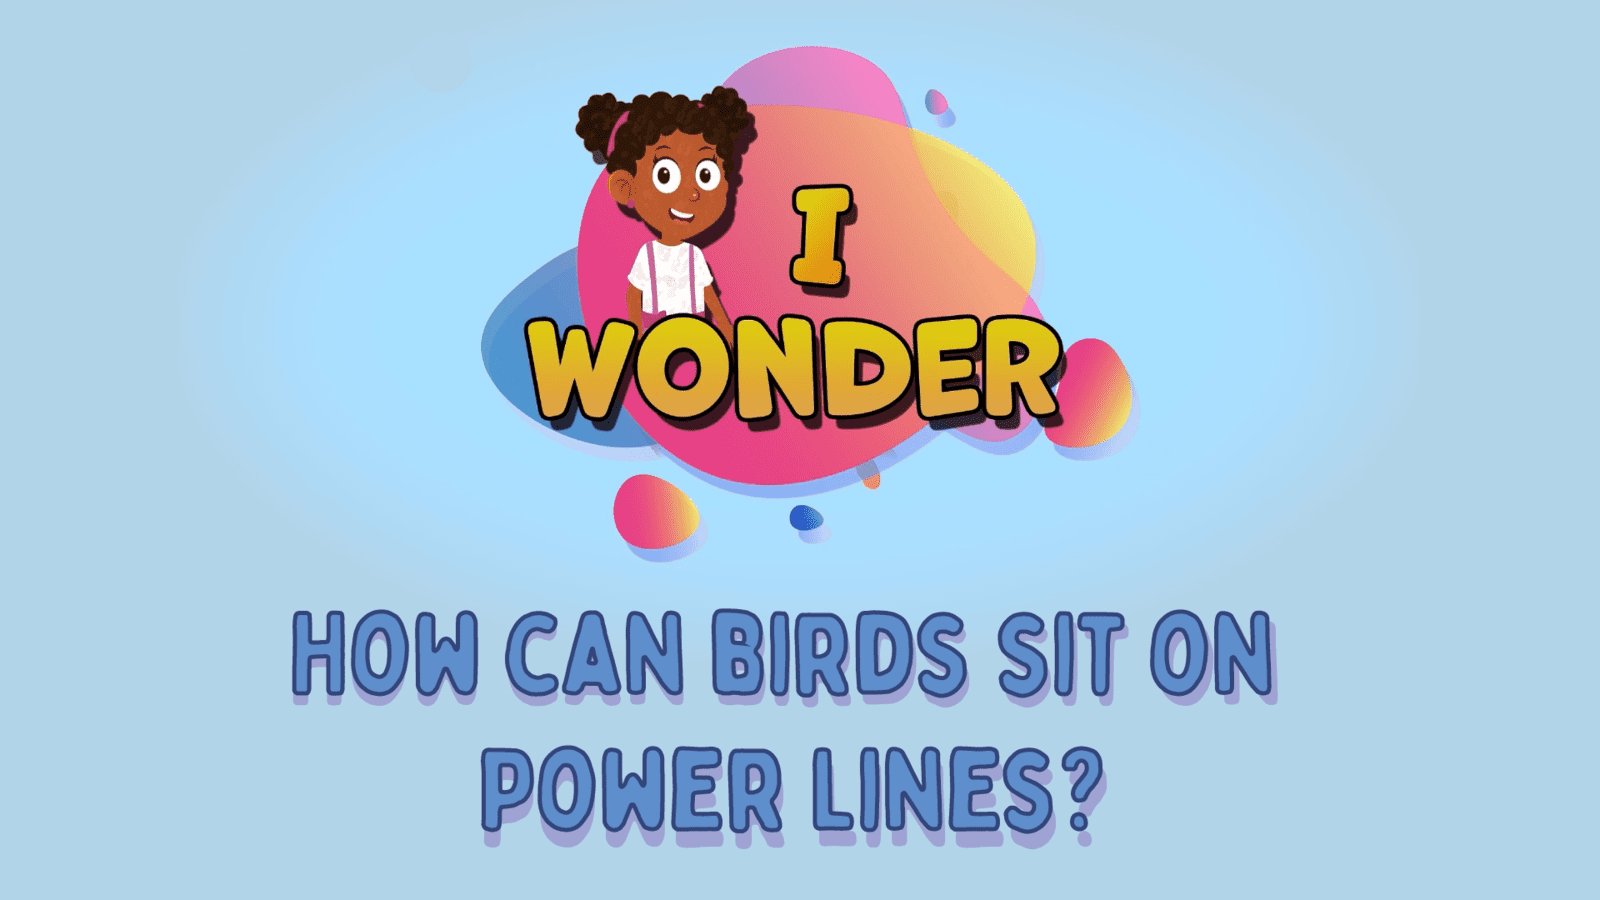 How Can Birds Sit On Power Lines?